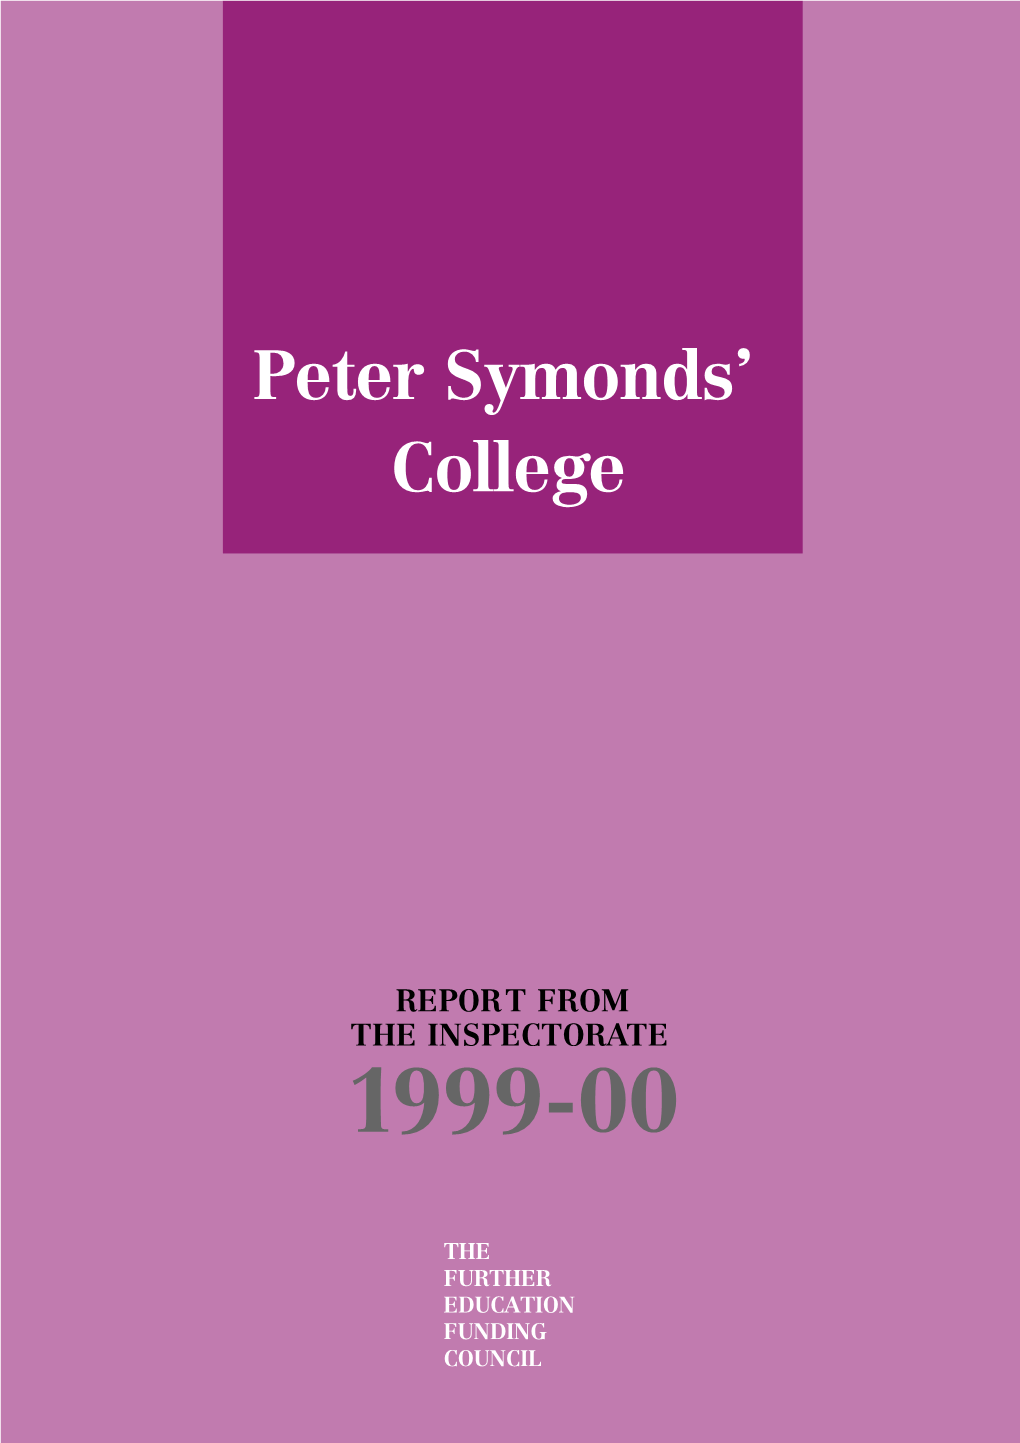 Peter Symonds' College Inspection Report 2000